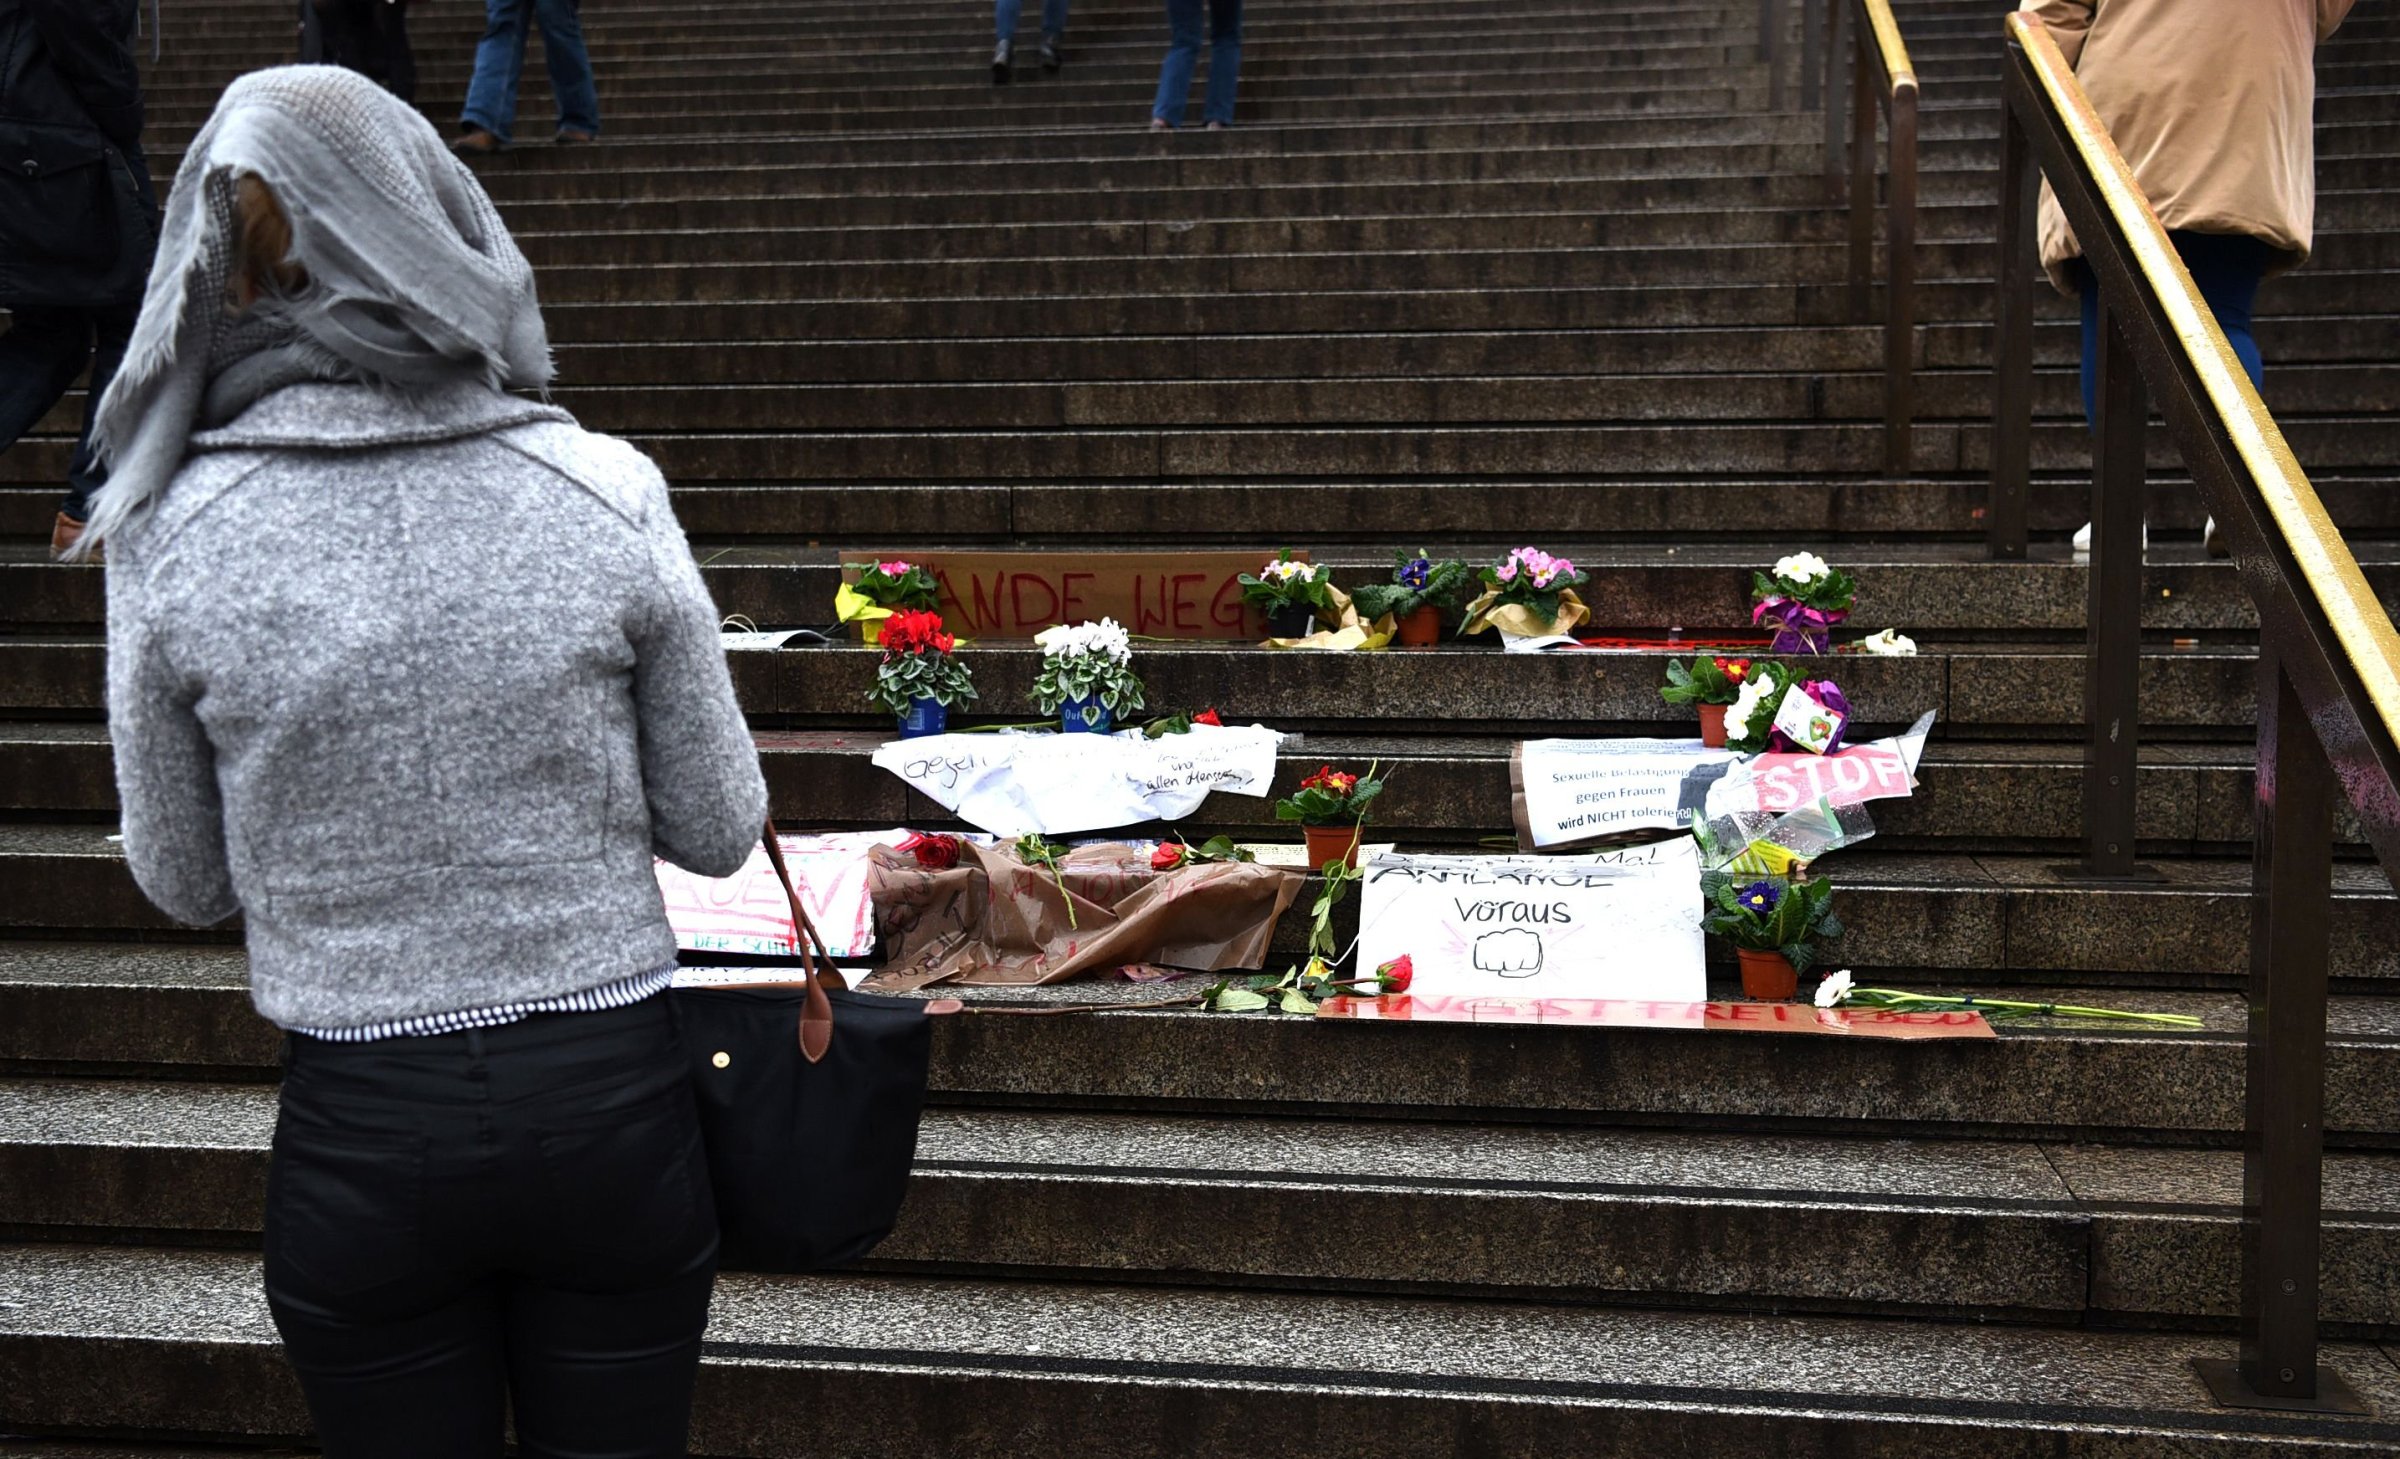 A woman looks at flowers and letters of protest that are laid down on the steps in front of the Cologne main train station in Cologne, western Germany on Jan. 11, 2016.